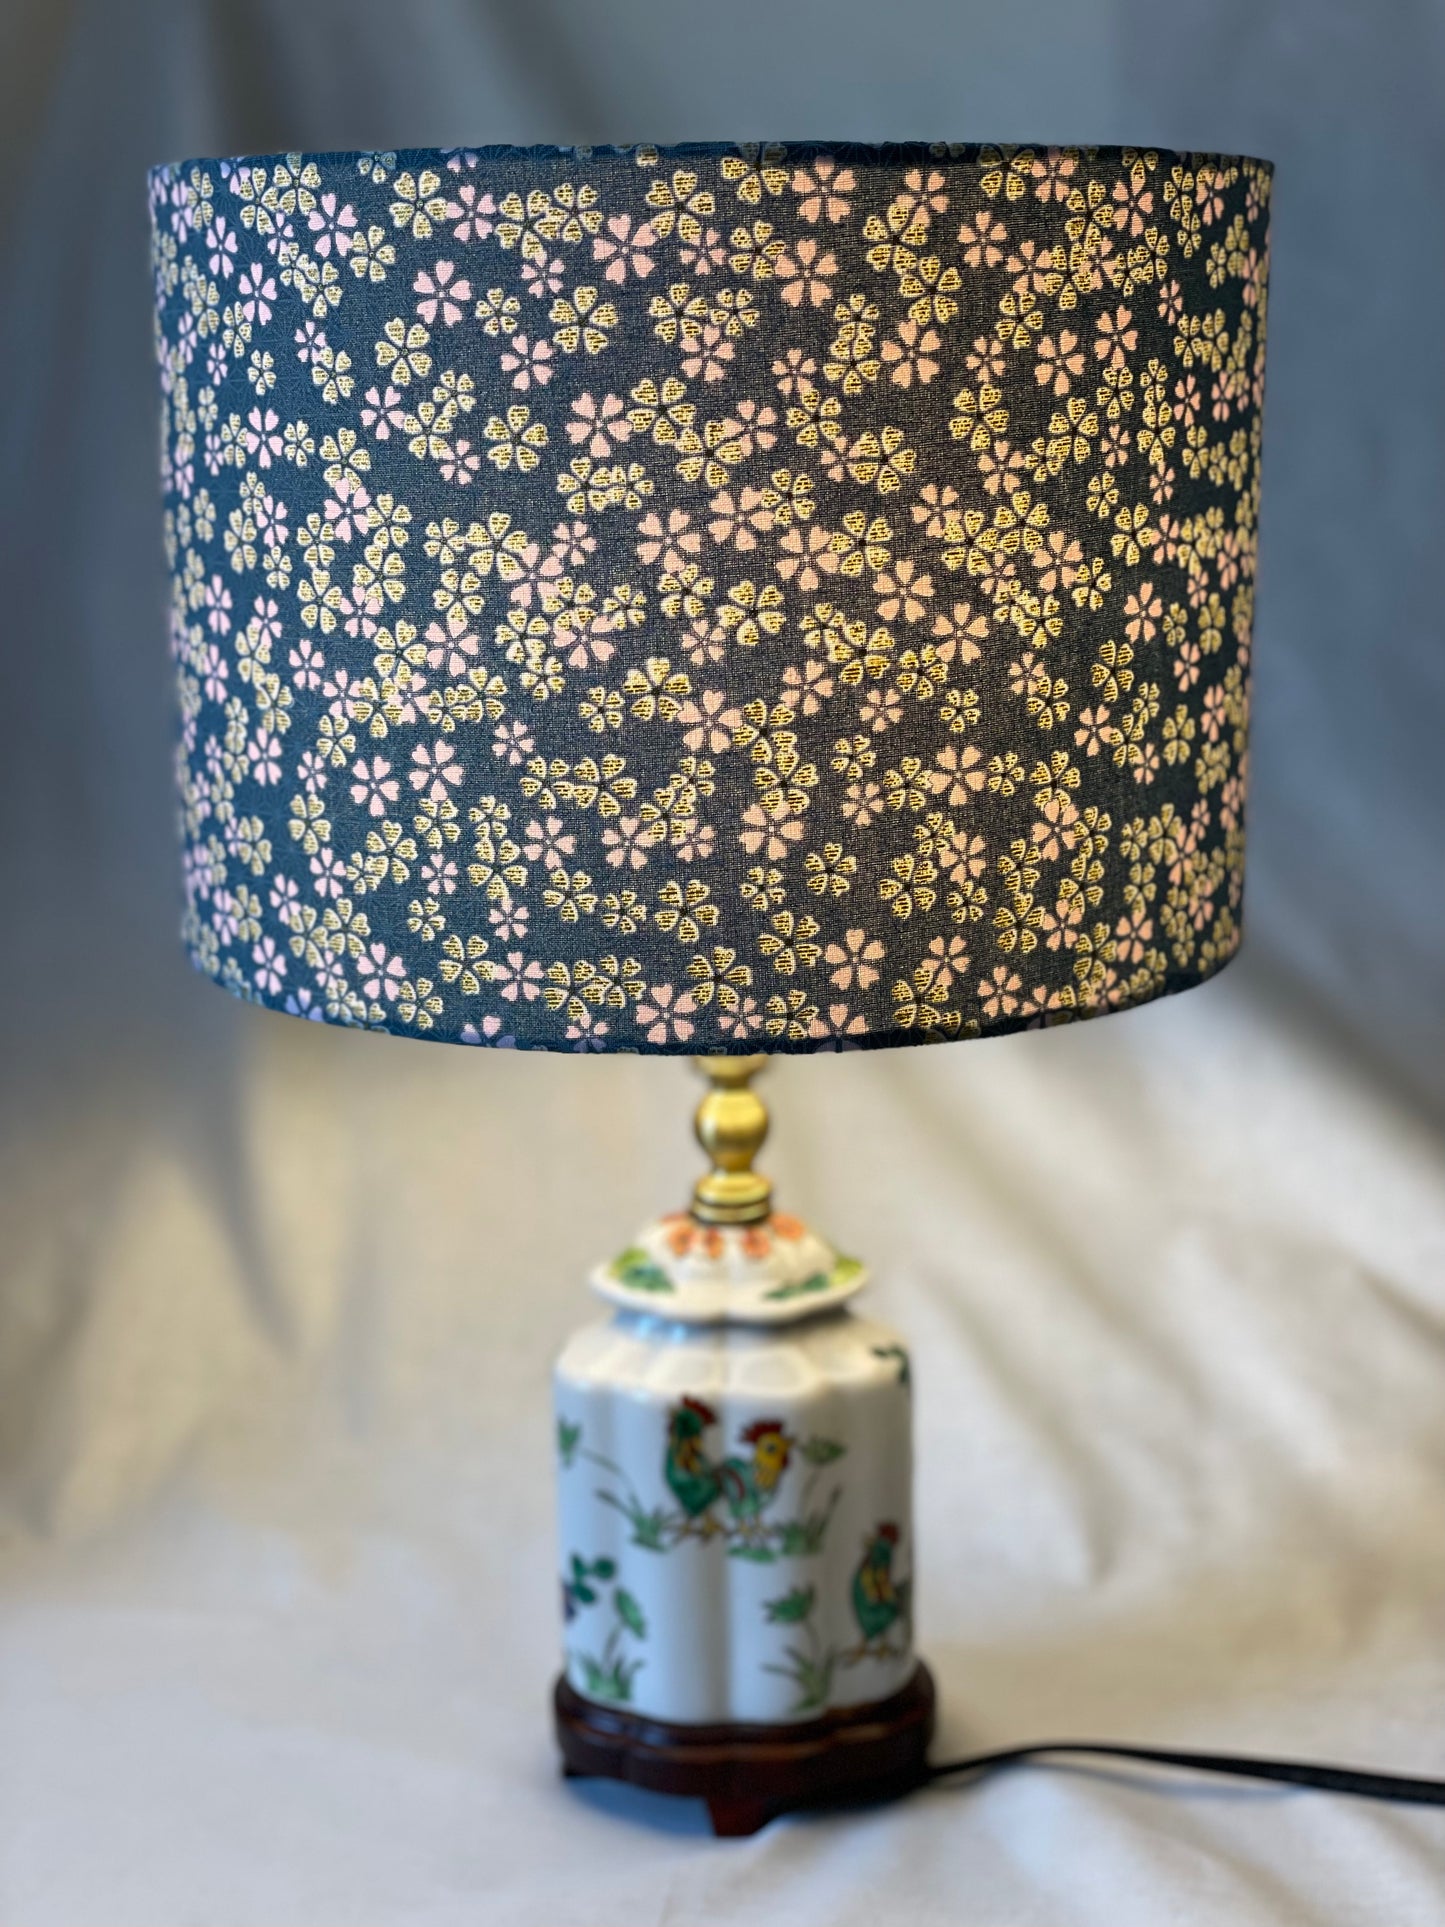 10 inch Drum Lampshade. Japanese Cherry Blossom Motif, Light Teal, Gold, and Pale Pink.